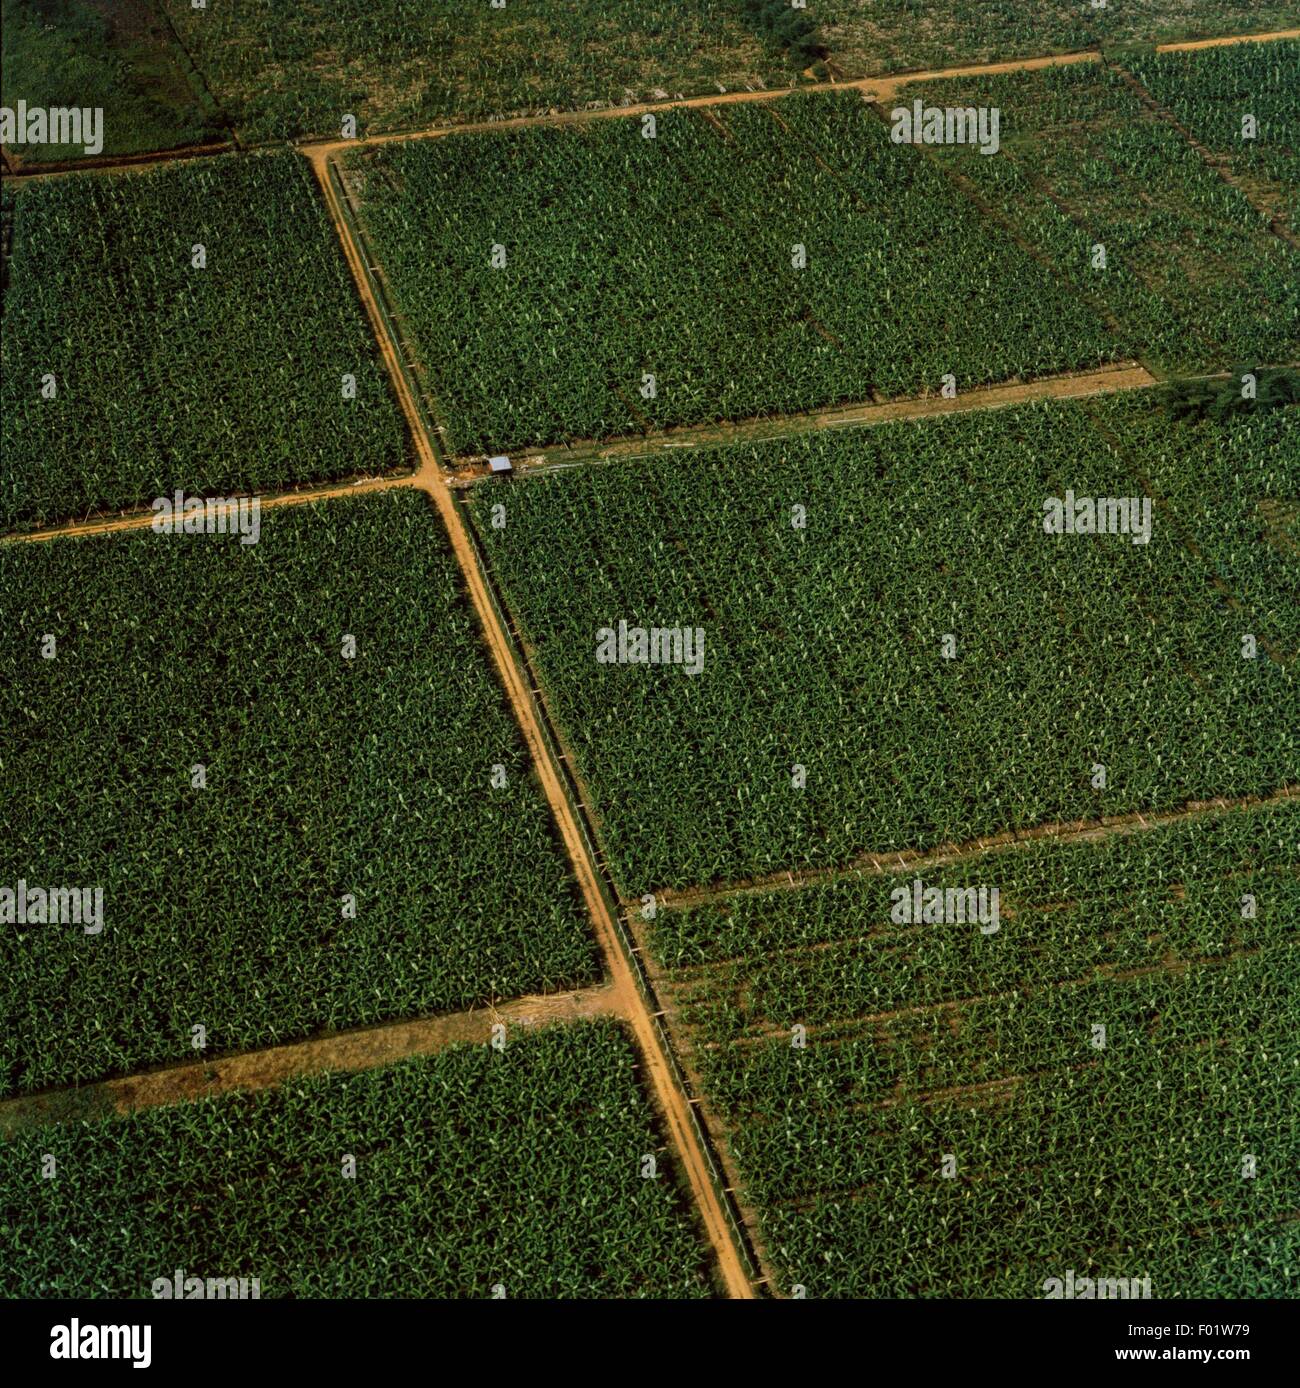 Aerial view of banana plantation - Cote d'Ivoire Stock Photo